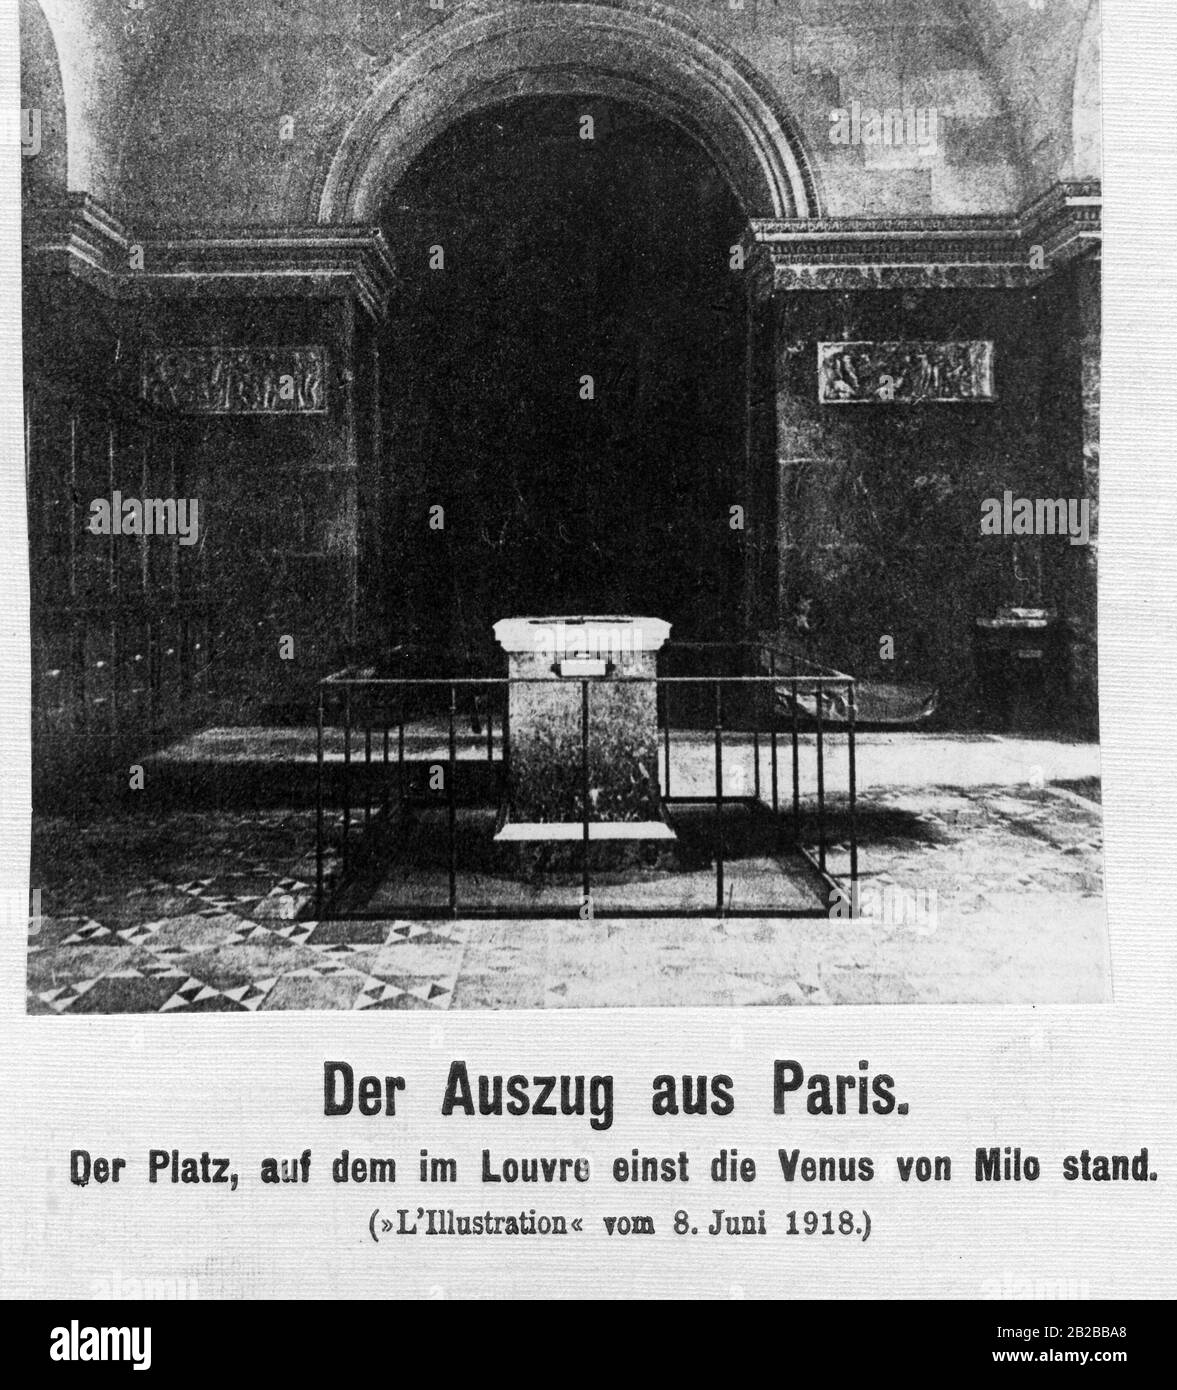 Inner views of the Louvre after some artworks had been secured. The photo, which was published in 'L'Illustration' the 8th june 1918, shows the place where the Venus de Milo once stood. Stock Photo